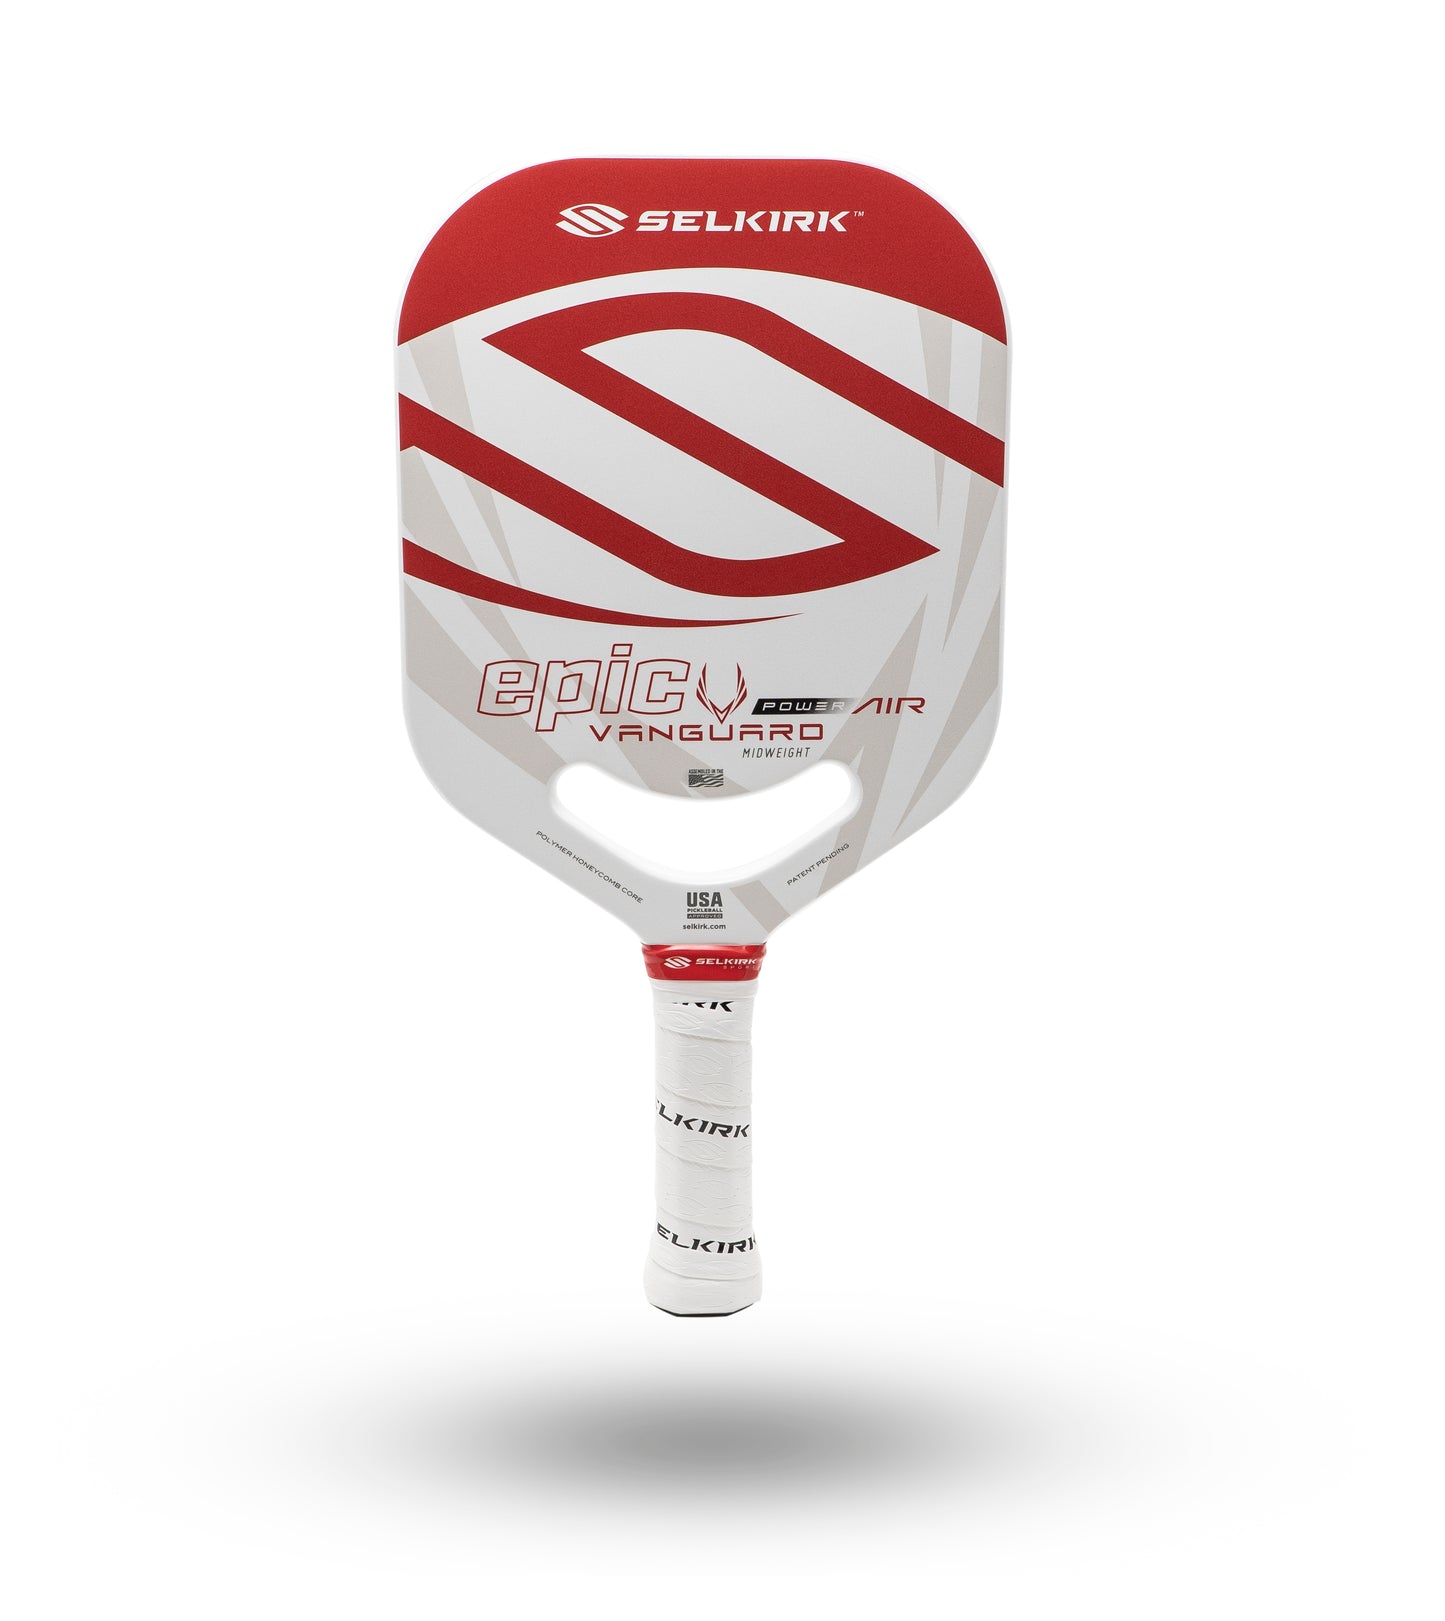 Selkirk Epic Vanguard Power Air Pickleball Paddle in red and white